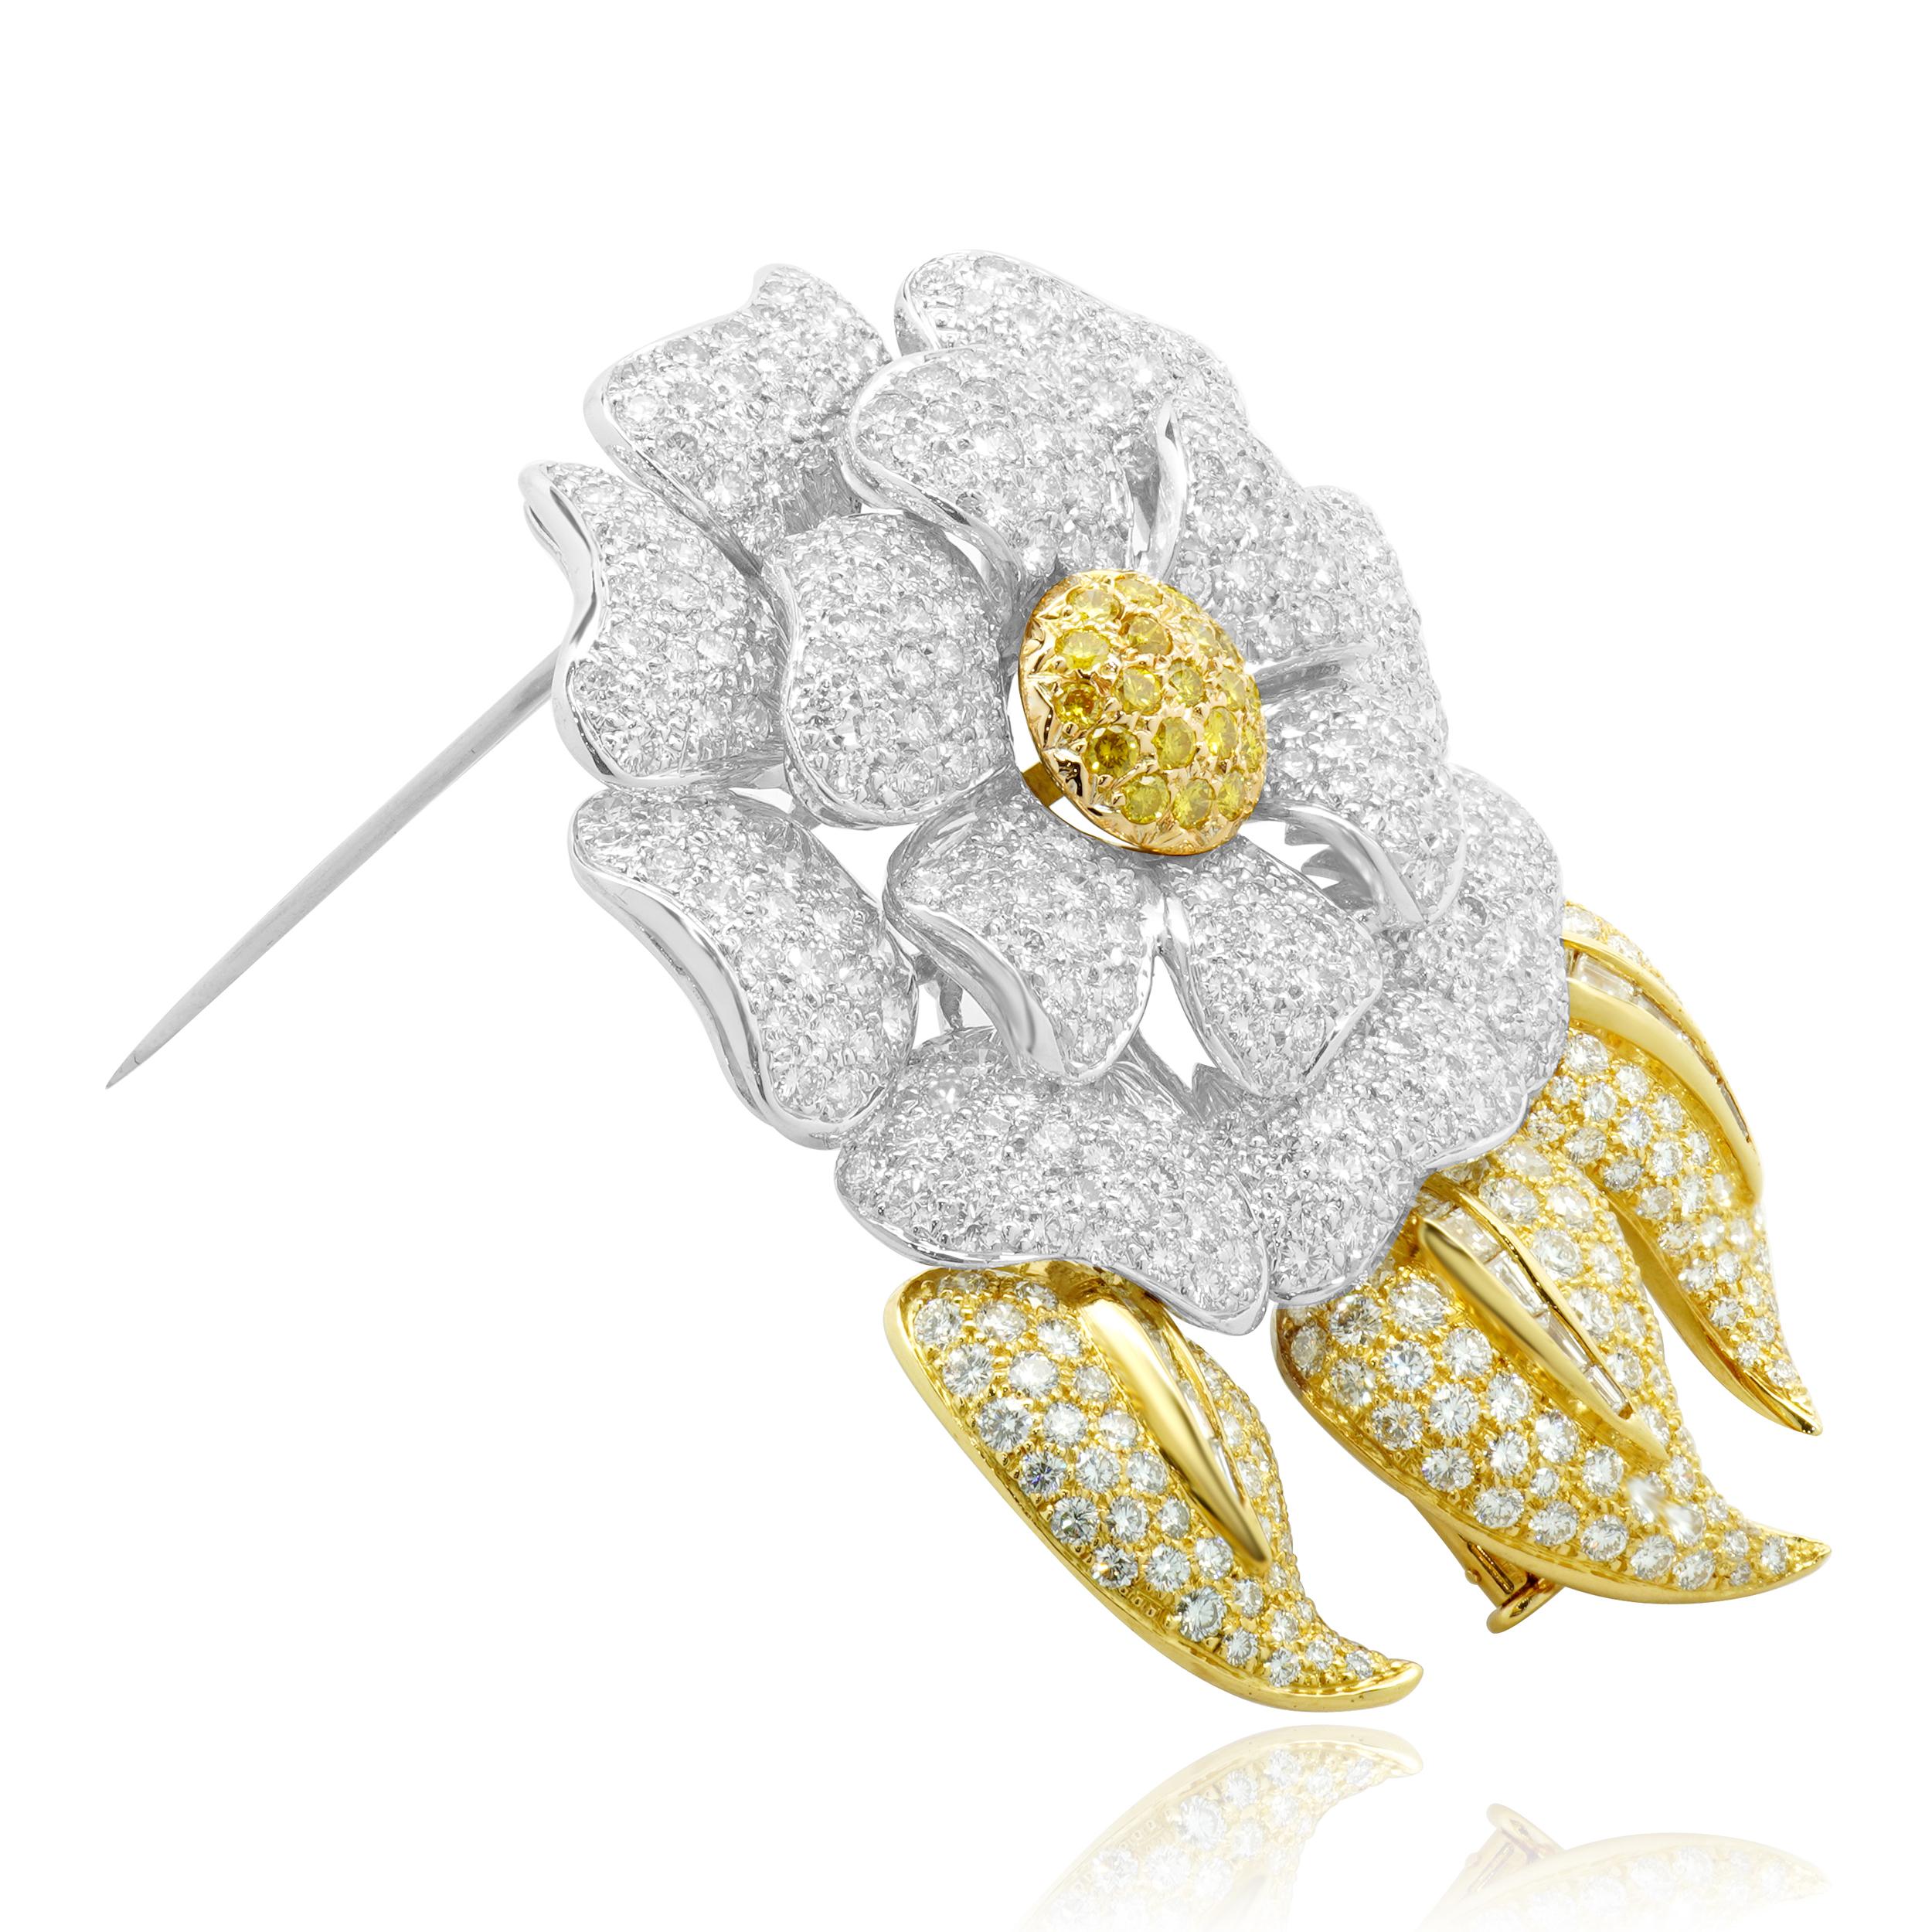 Designer: custom
Material: 18K white & yellow gold
Diamond: 453 round brilliant & 14 baguette cut = 14.12cttw
Color: G
Clarity: VS2
Diamond: 30 round brilliant cut = 0.60cttw
Color: Fancy Yellow
Clarity: SI1
Weight: 49.44 grams
